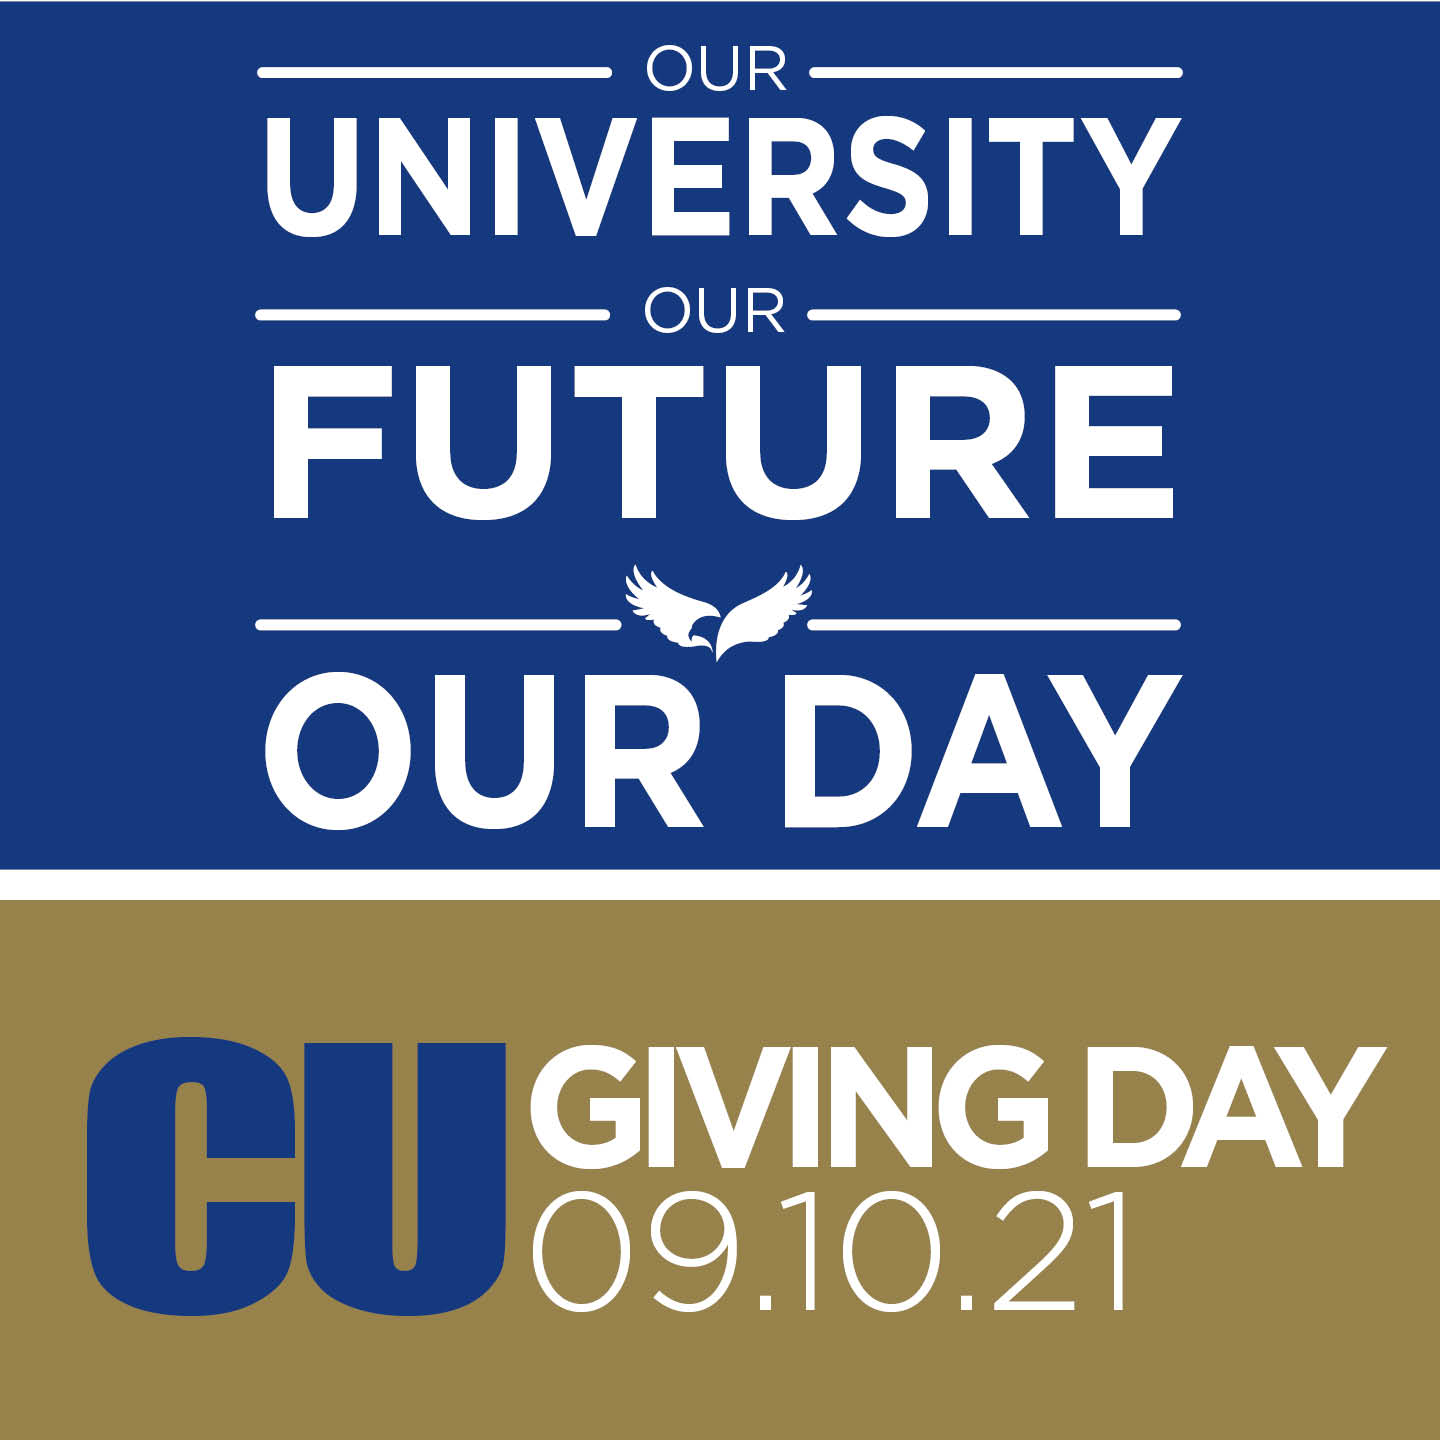 Giving Day Image